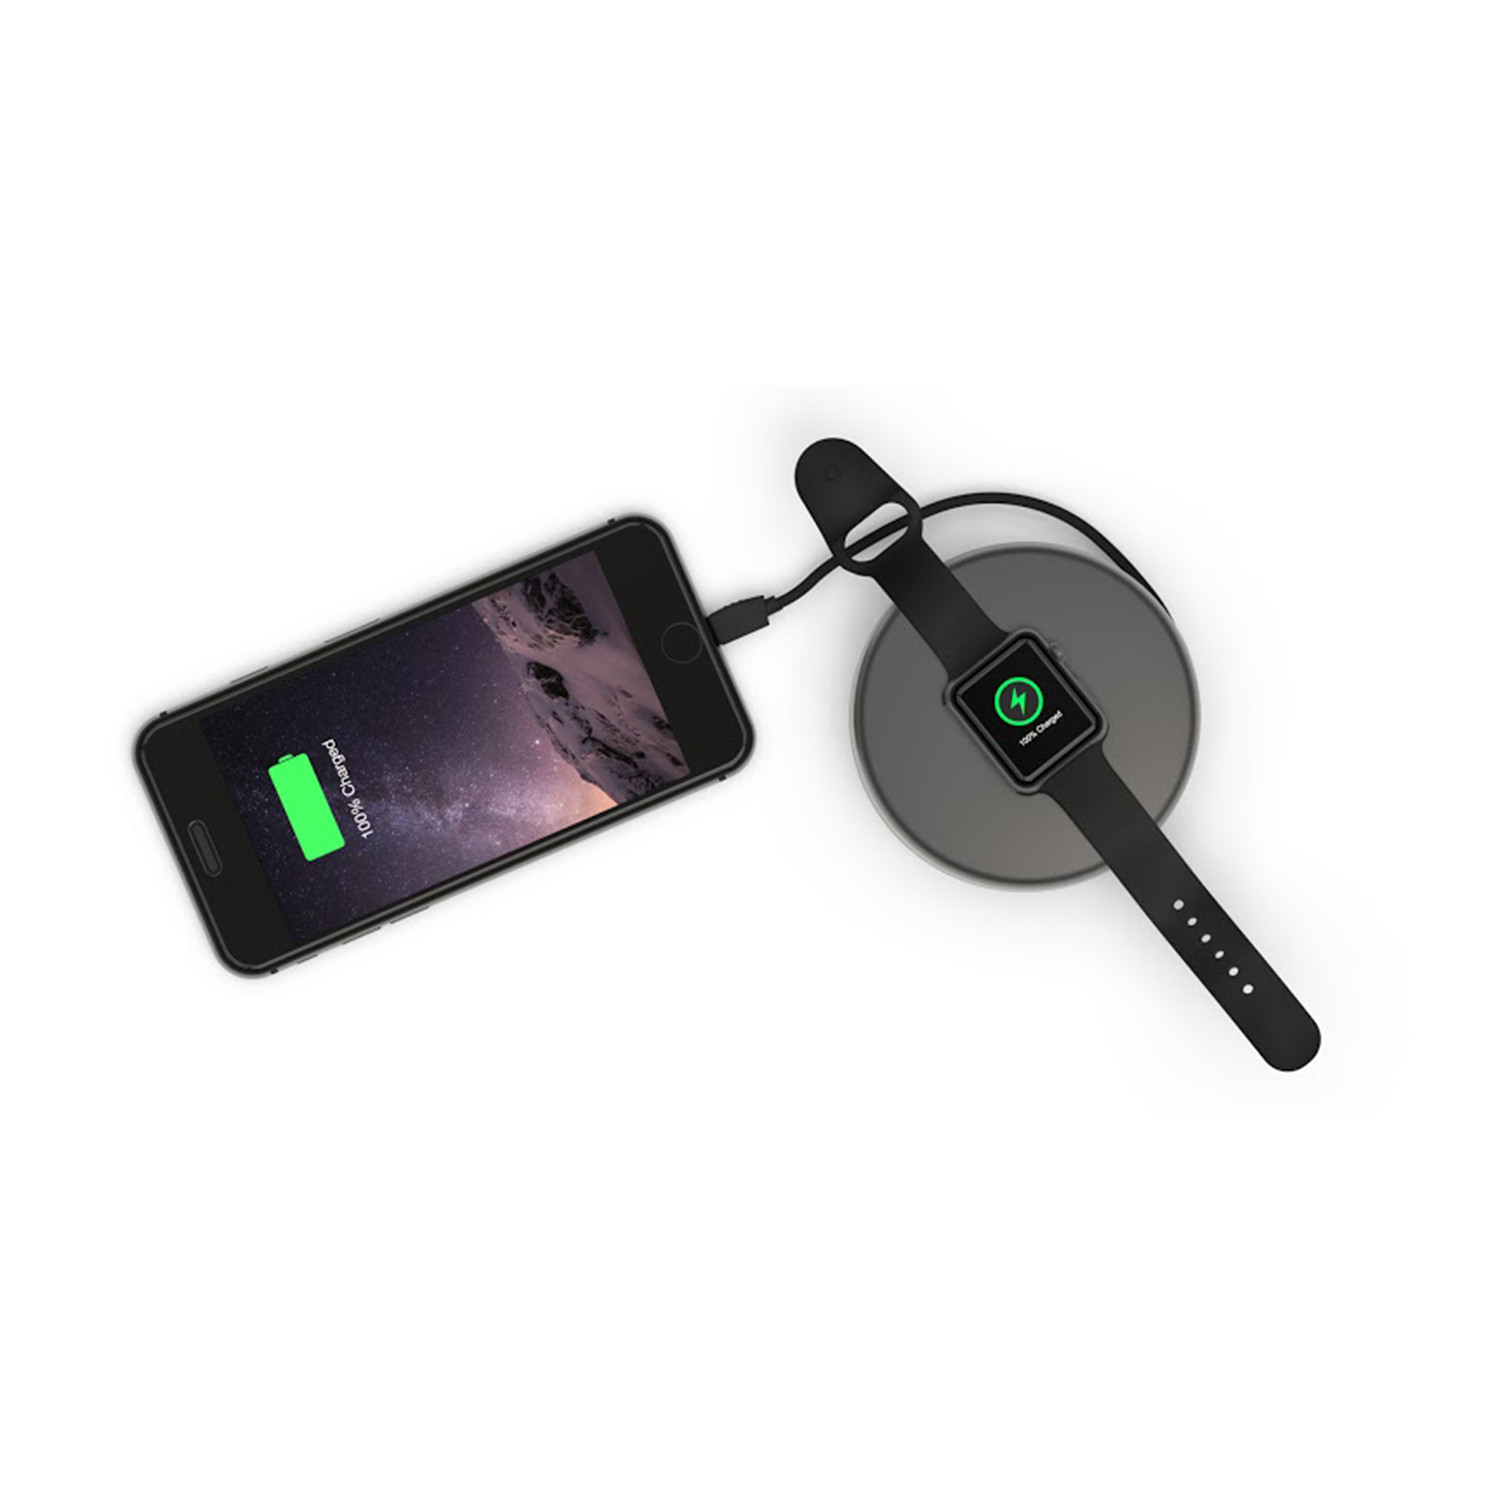 Nomad Wireless Charger. Аккумулятор Nomad pod for Apple watch. SG pods часы. Внешний аккумулятор Nomad для iphone.